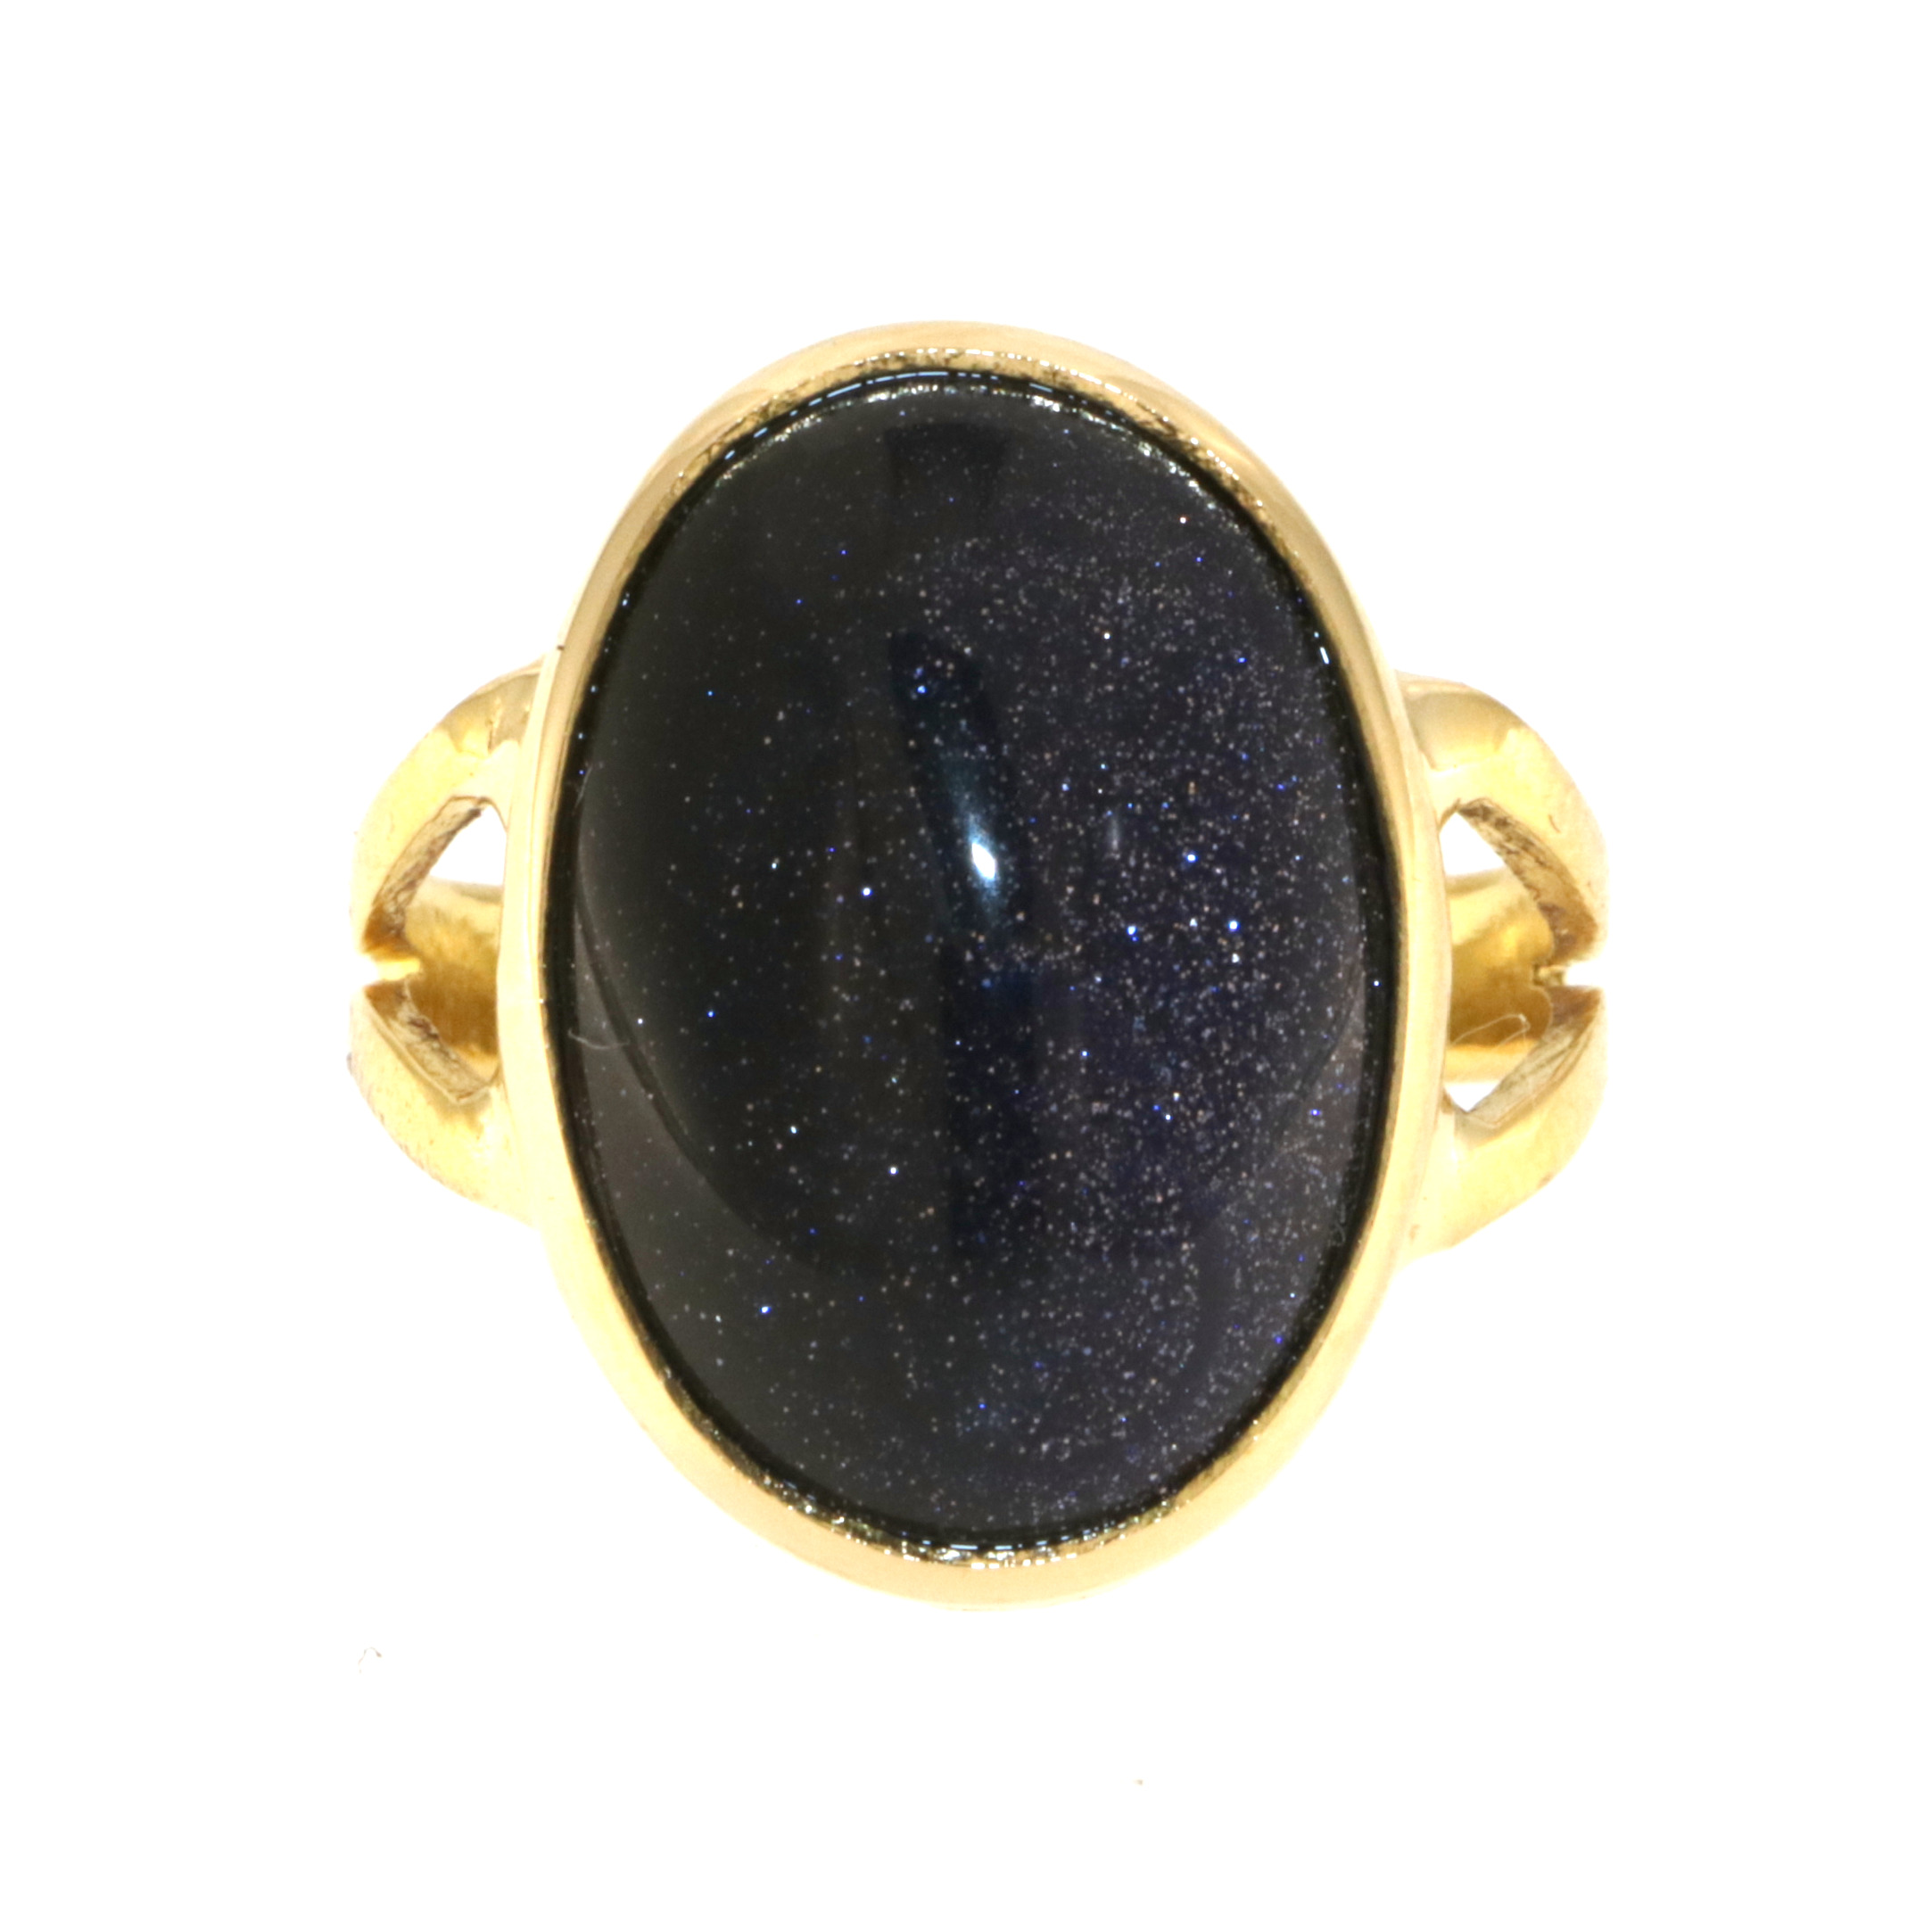 22ct Real Gold Asian/Indian/Pakistani Style Handmade Blue Goldstone Ring